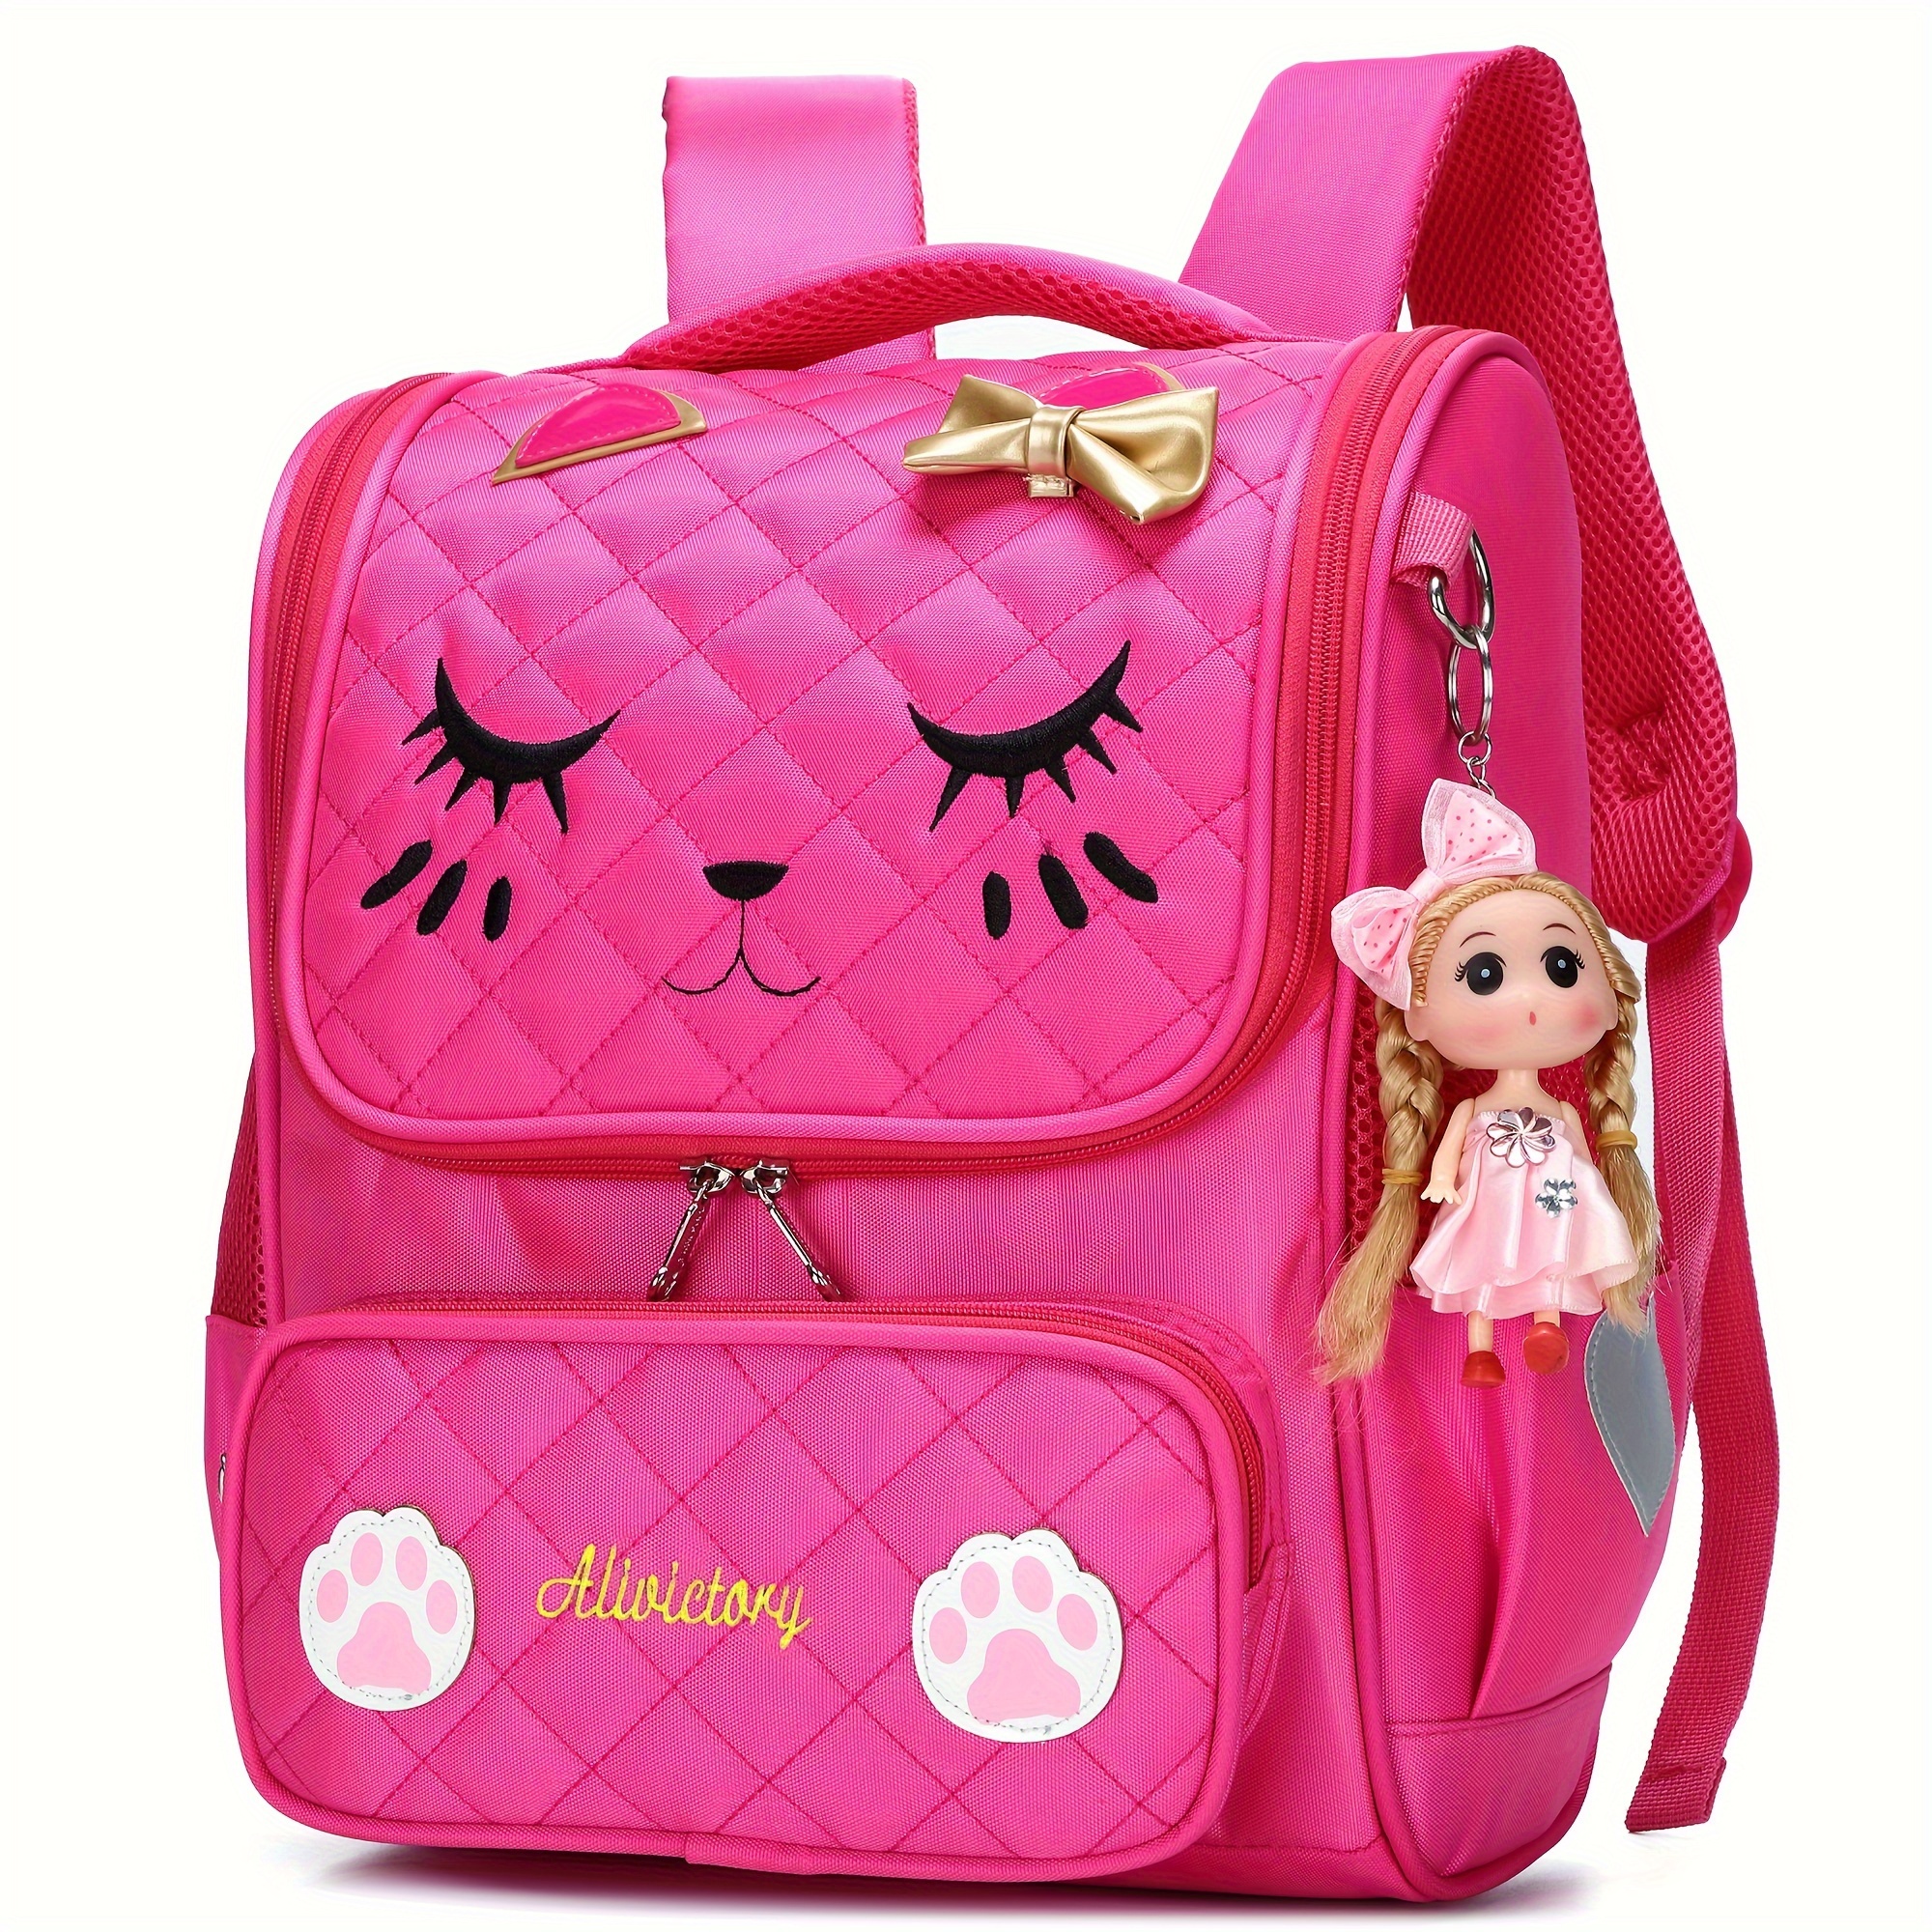 

Girls Backpack Set With Lunch Box 15.6-inch Laptop Backpack Cute College Backpack Large Book Bag For Women Teen Student Anti-theft Travel Day Bag